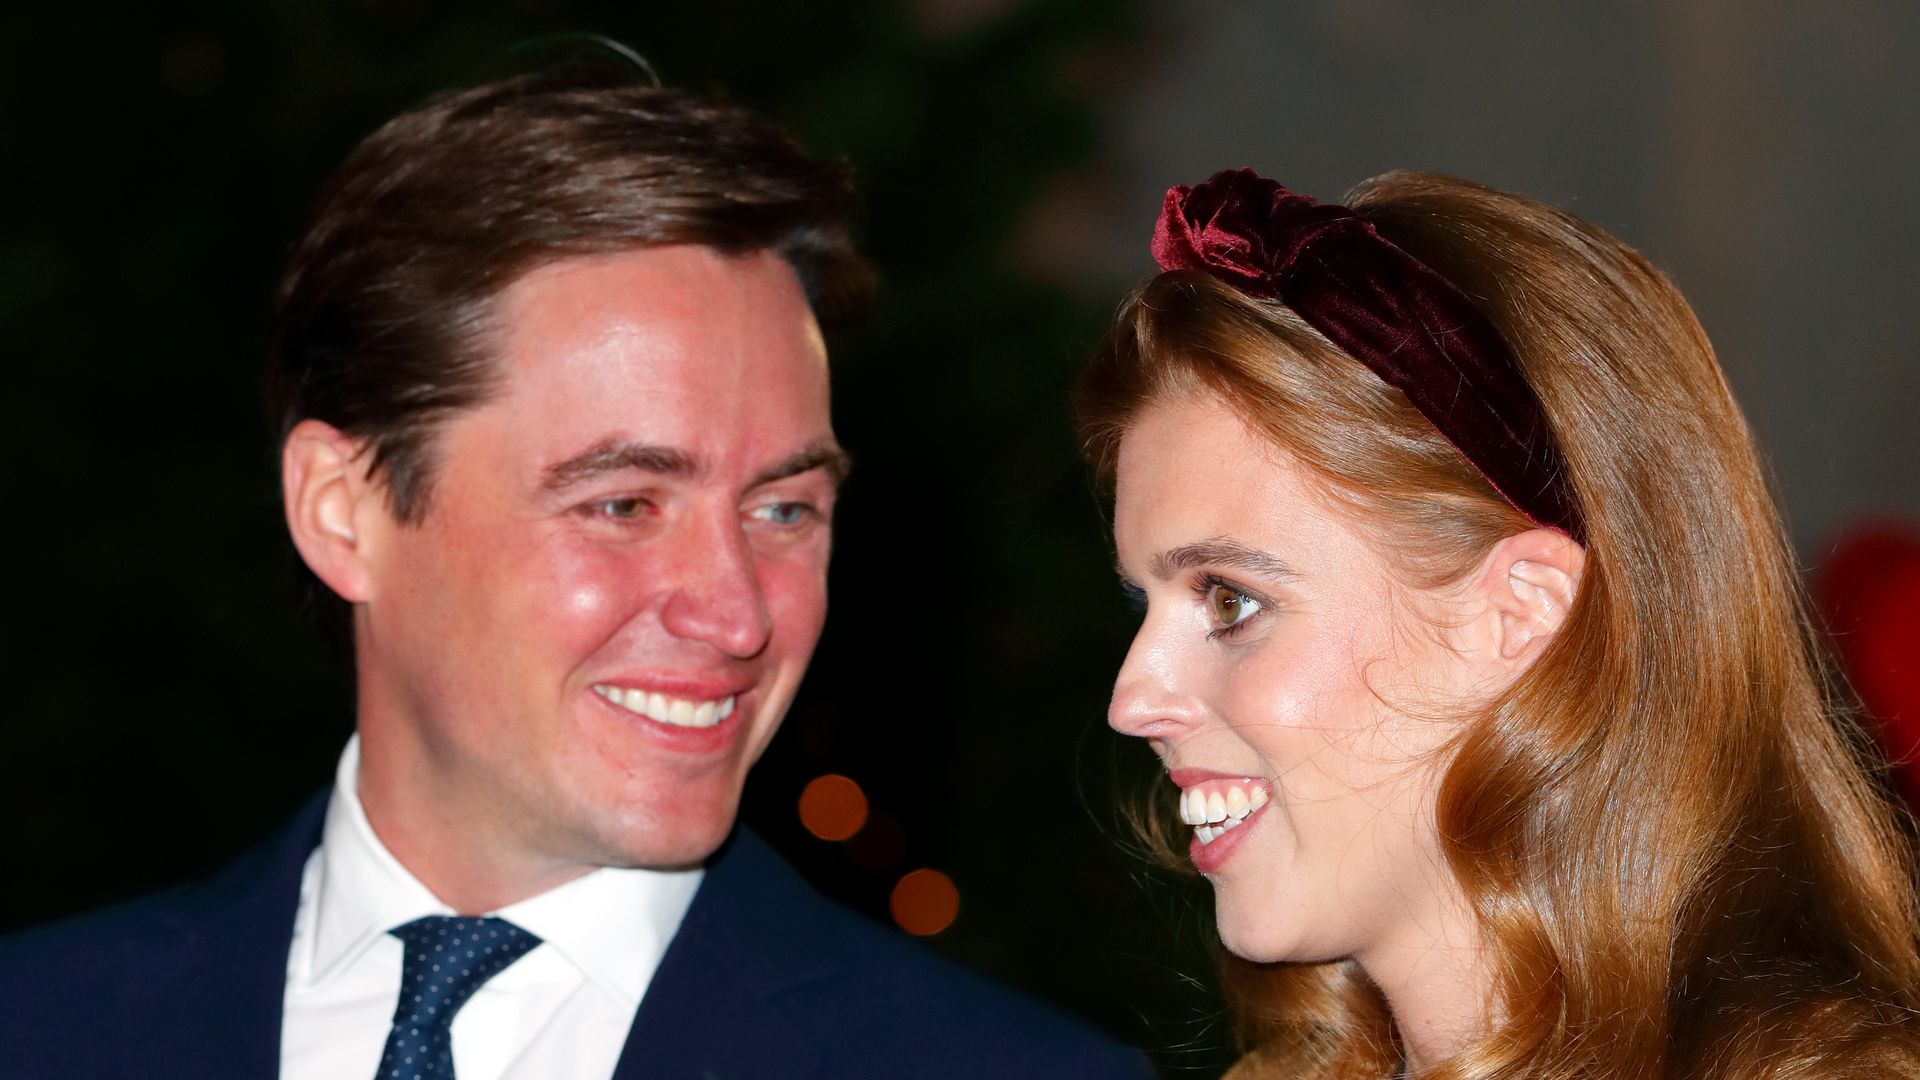 Edoardo Mapelli Mozzi and Princess Beatrice attend the 'Together at Christmas' community carol in 2021